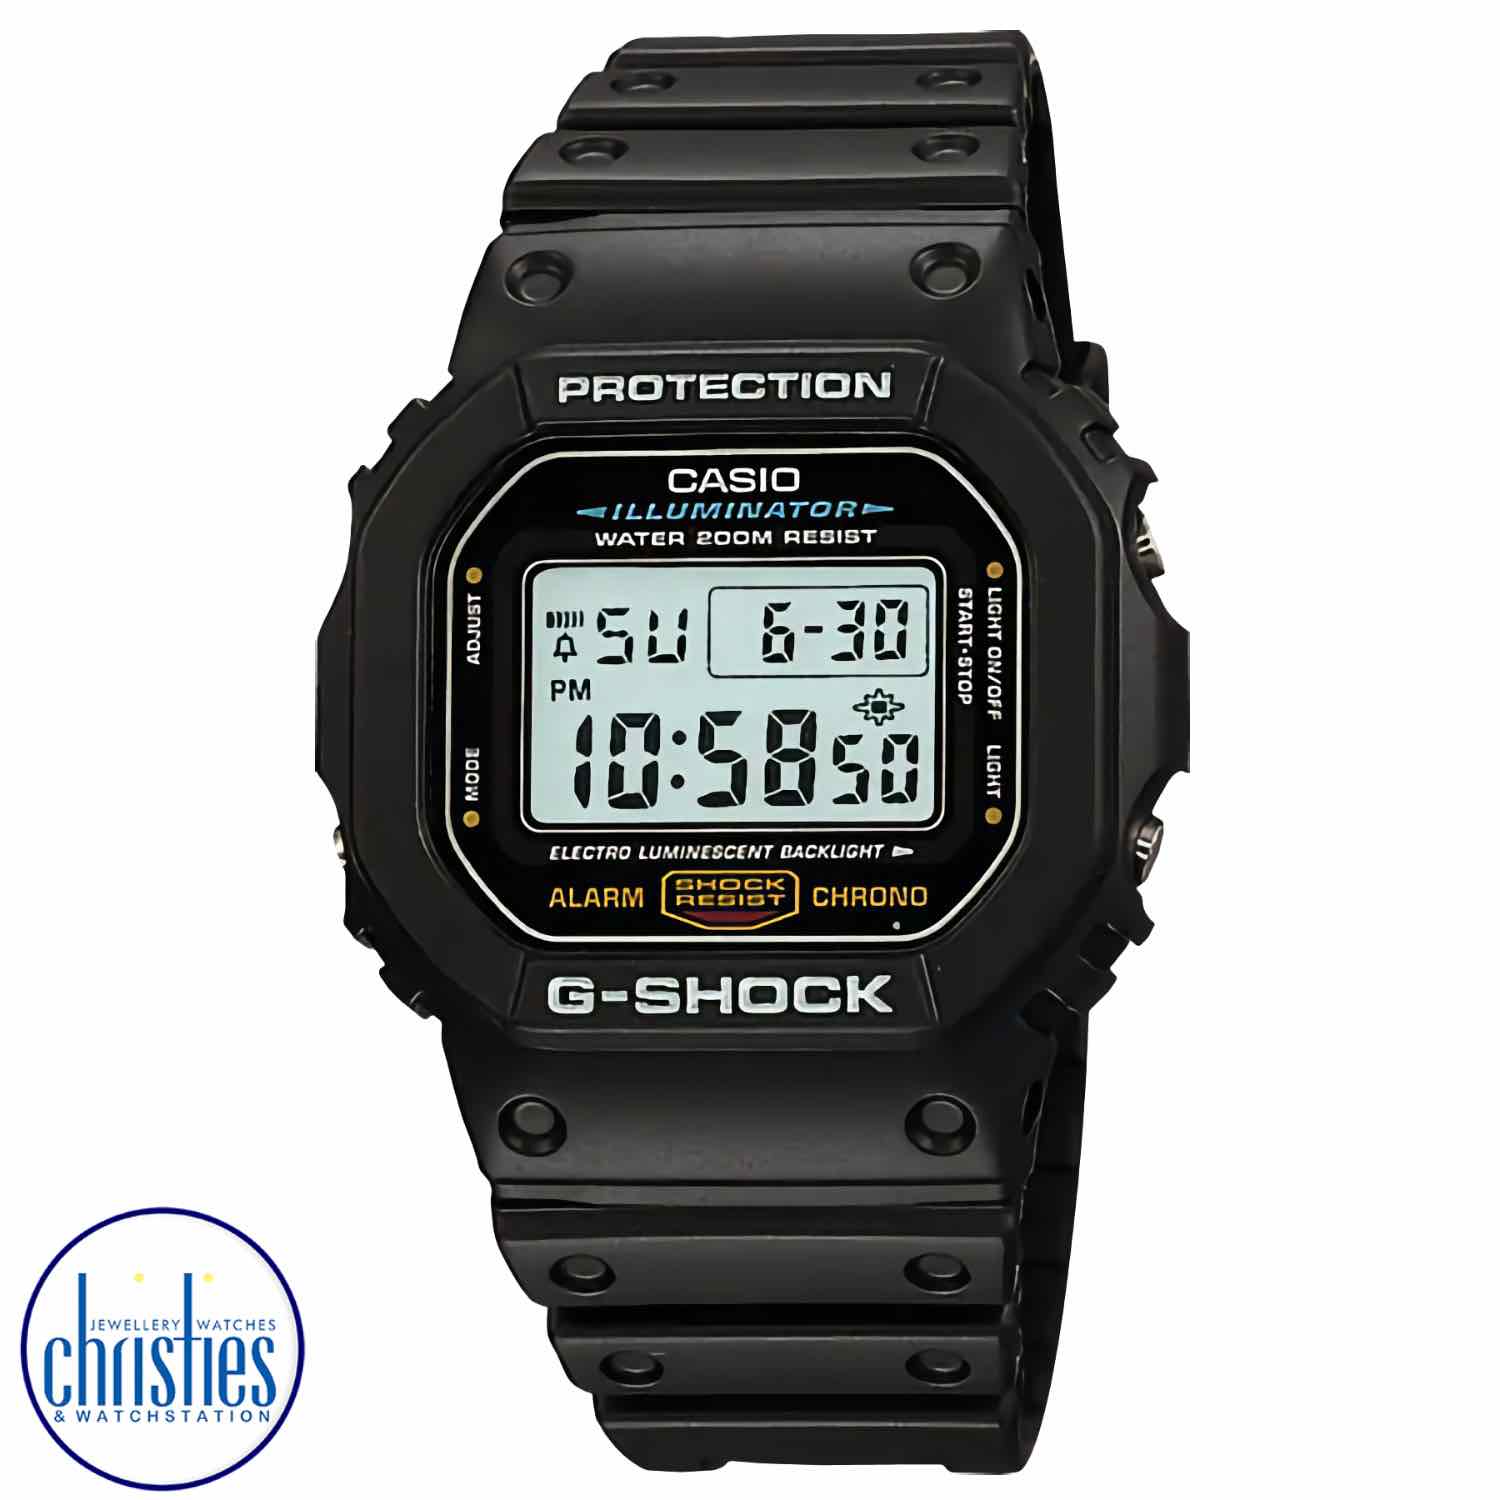 DW5600E-1 Casio G-Shock Watch. A slapshot by a professional hockey player was all it took to send this G-Shock into history and into a goalies mitt, literally. charm bracelets like pandora